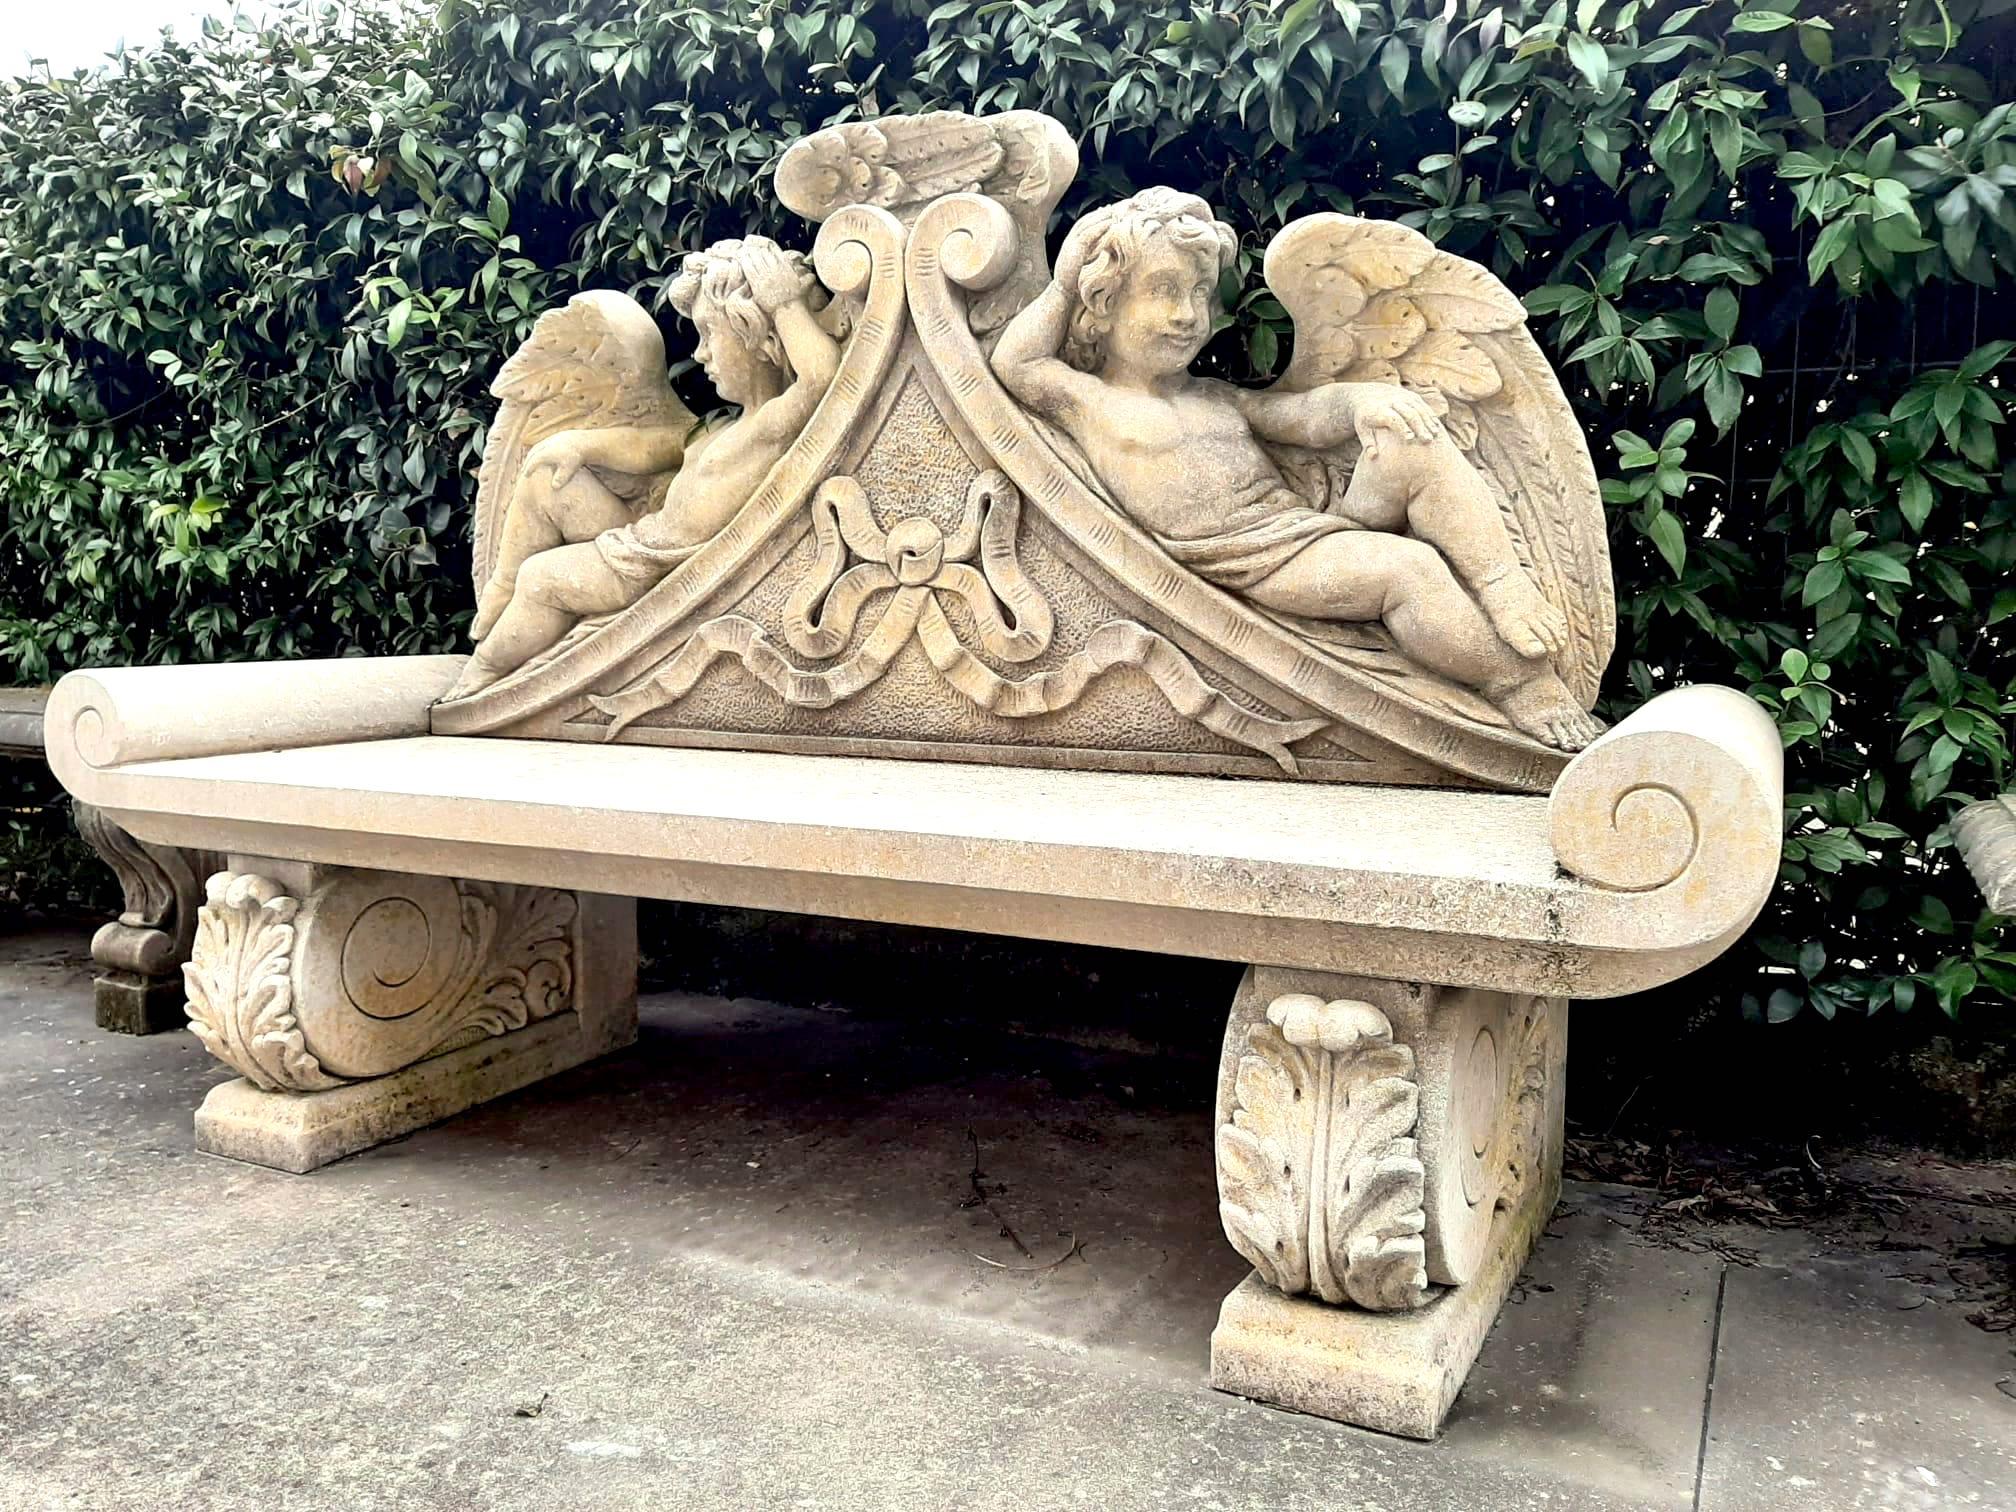 Limestone Outdoor Italian Finely Carved Large Lime Stone Bench Garden Furniture For Sale